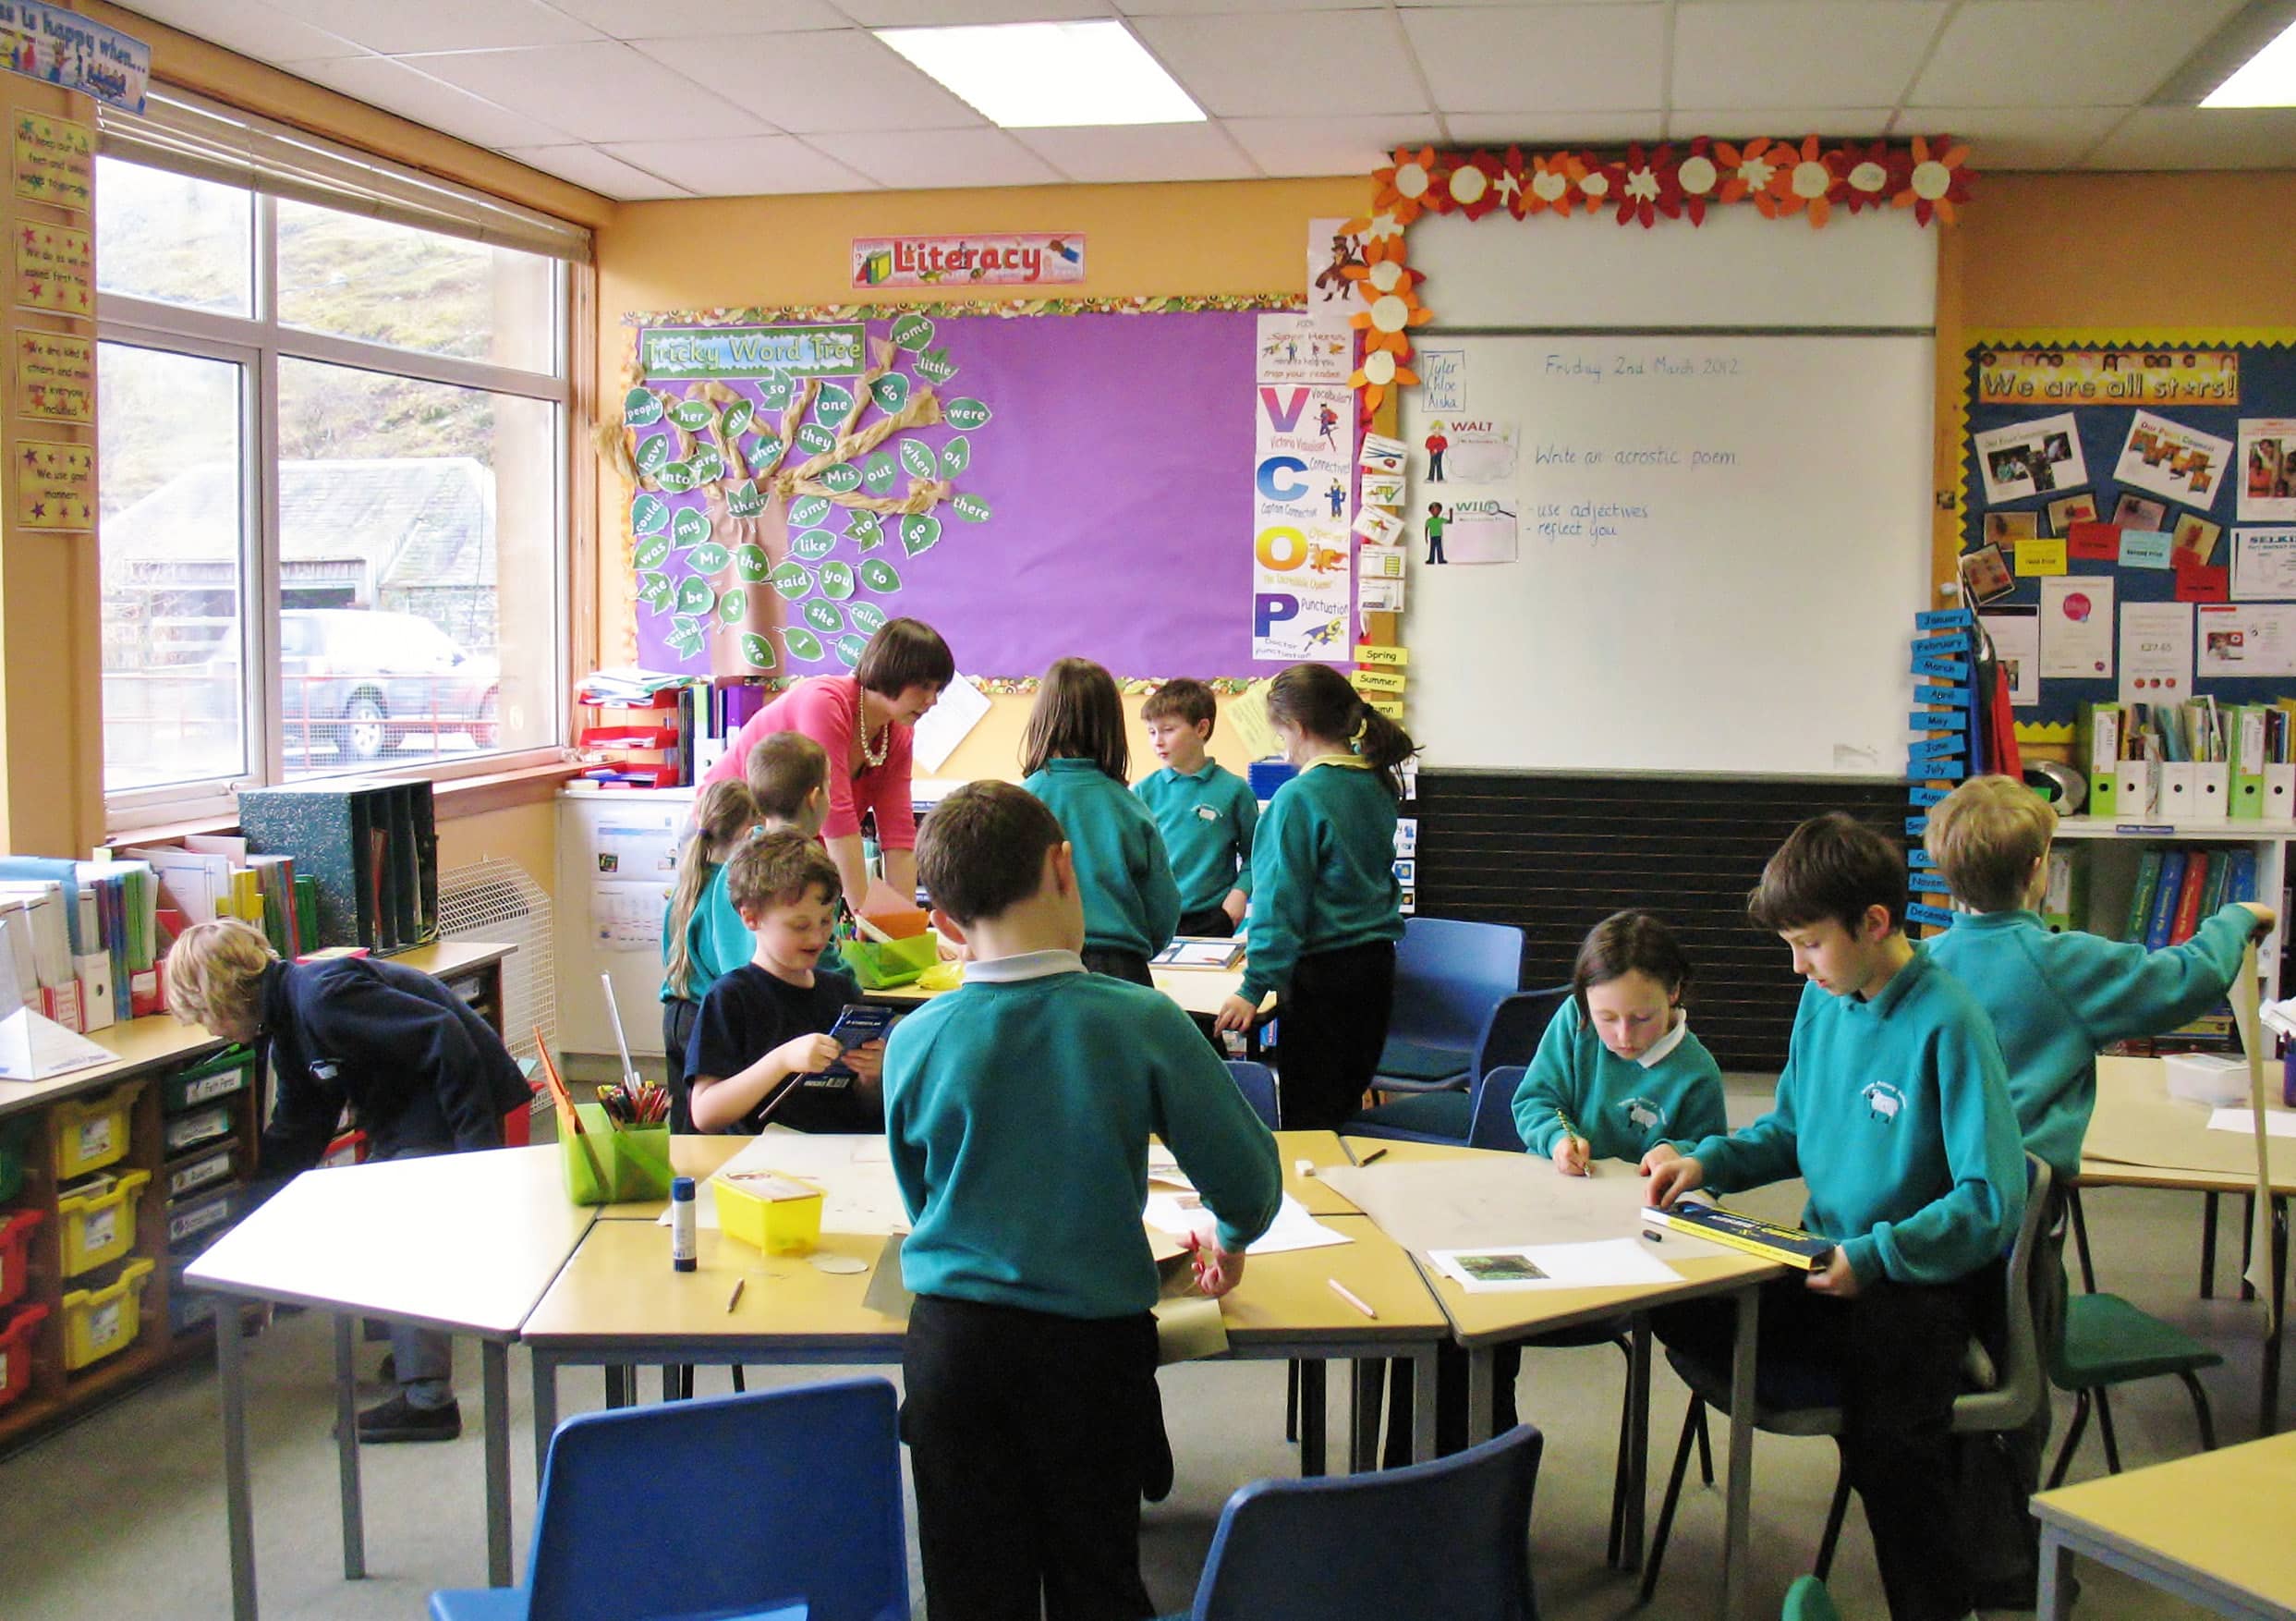 Children learn in a brightly coloured classroom at Yarrow Primary. The children are wearing teal coloured school uniform jumpers.